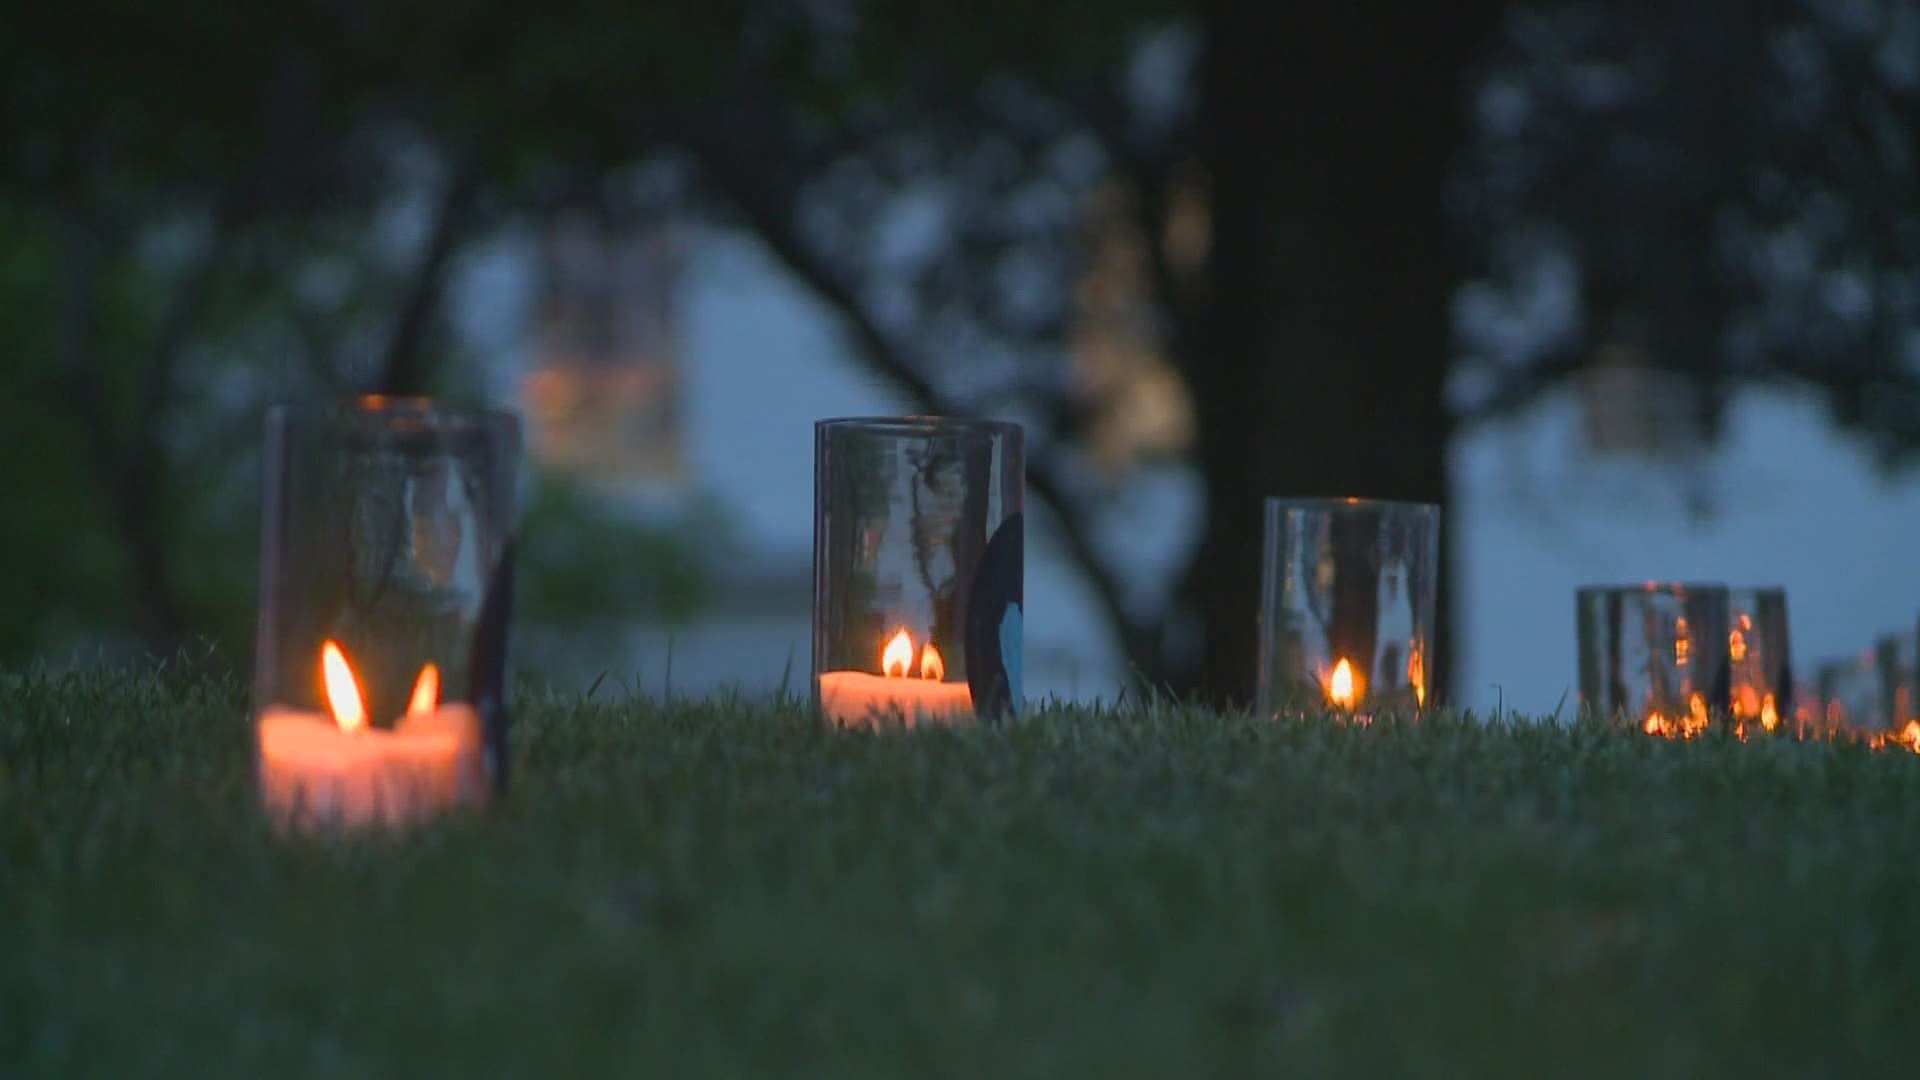 The candlelight vigil provided an opportunity to heal. Each candle a symbol of unity and a chance to reflect.